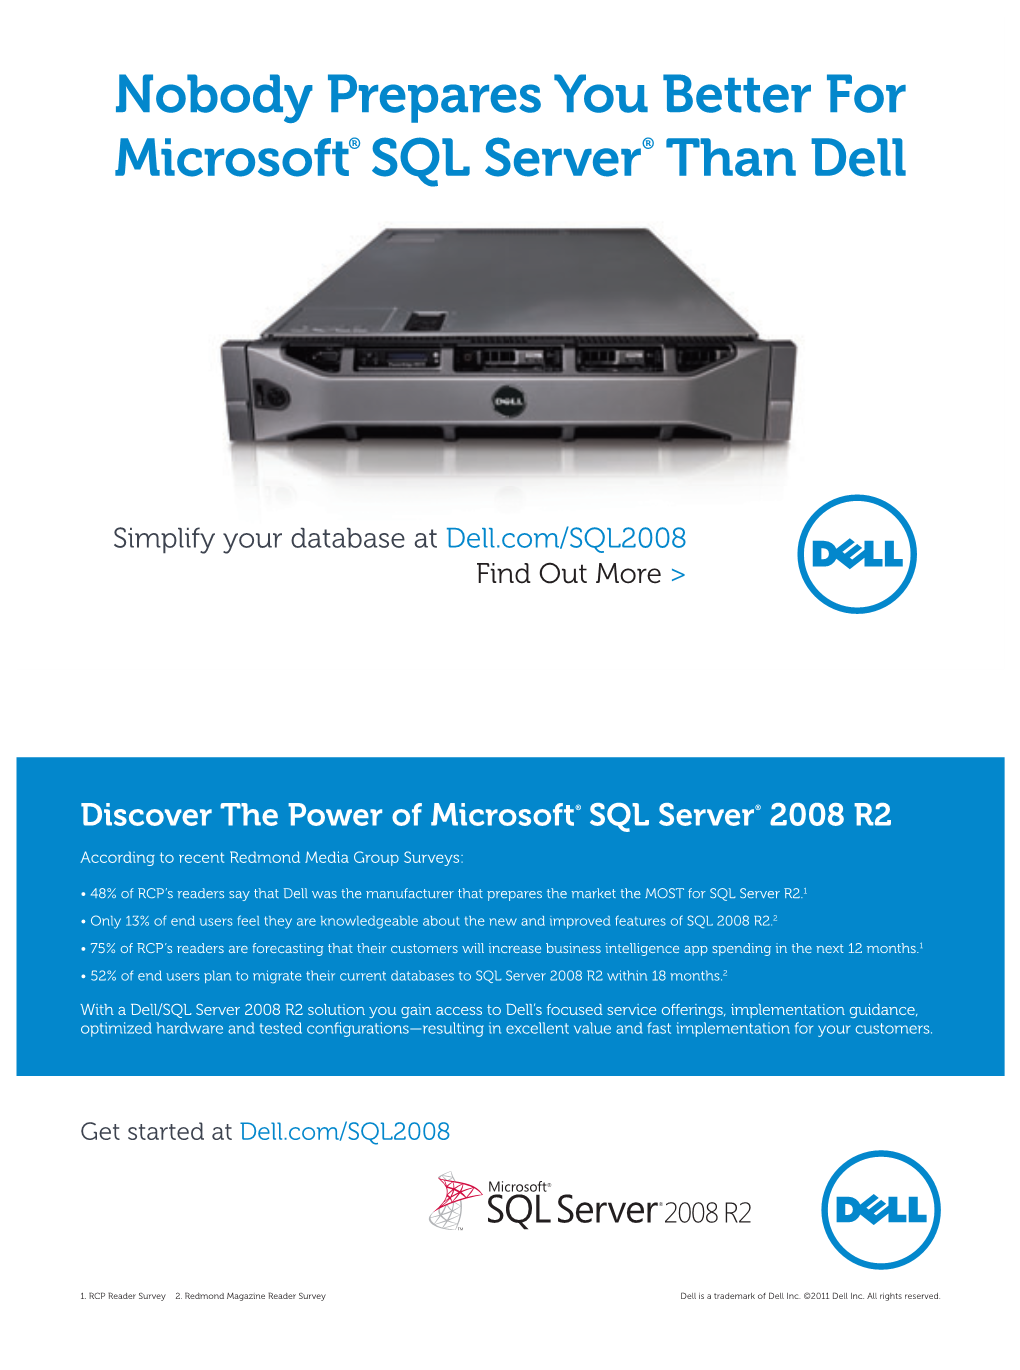 Nobody Prepares You Better for Microsoft SQL Server Than Dell